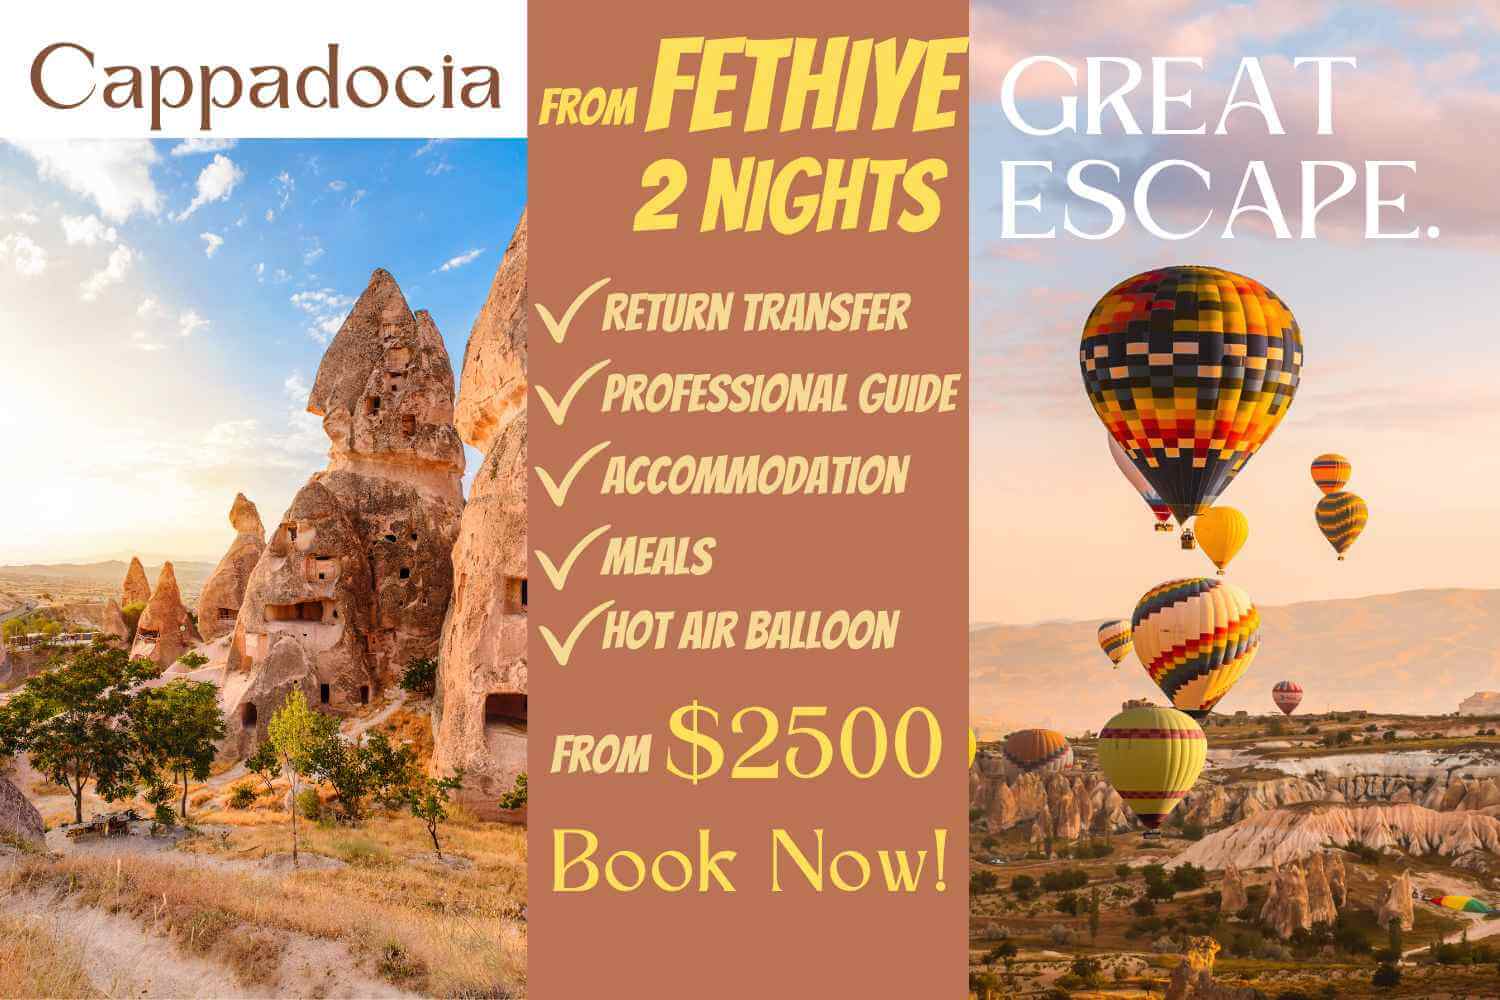 Cappodocia tour from Fethiye, two nights accommodation, tour guide, hot air balloon and return transfer included